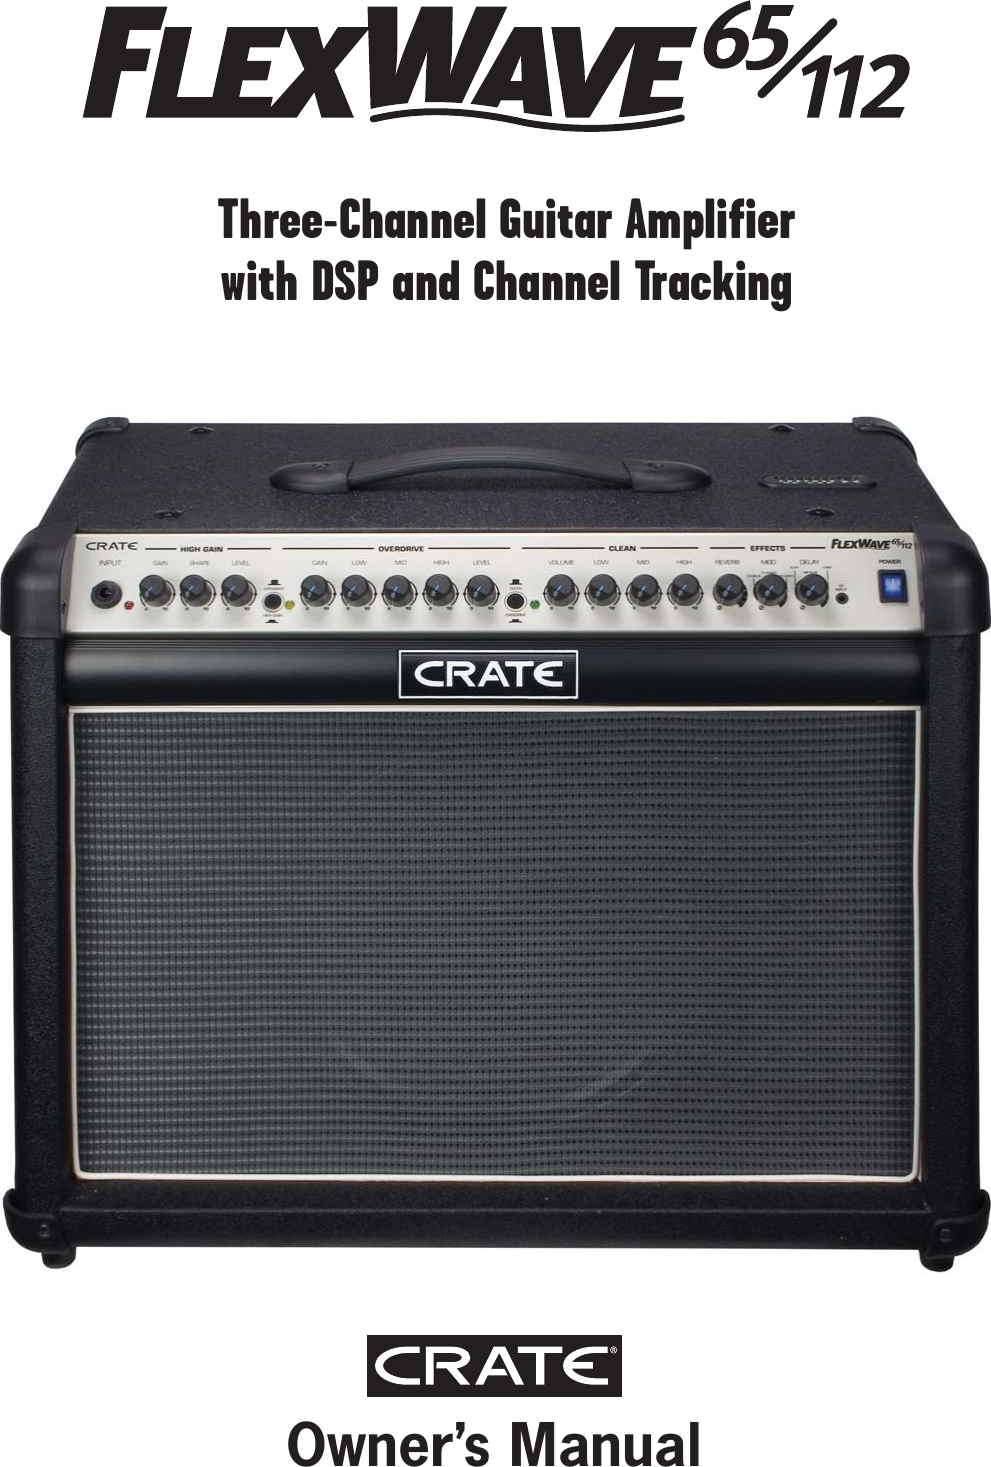 Page 1 of 12 - Crate-Amplifiers Crate-Amplifiers-Flexwave-65-112-Users-Manual- FlexWave 65/112 Three-Channel Guitar Amplifier Owner's Manual  Crate-amplifiers-flexwave-65-112-users-manual